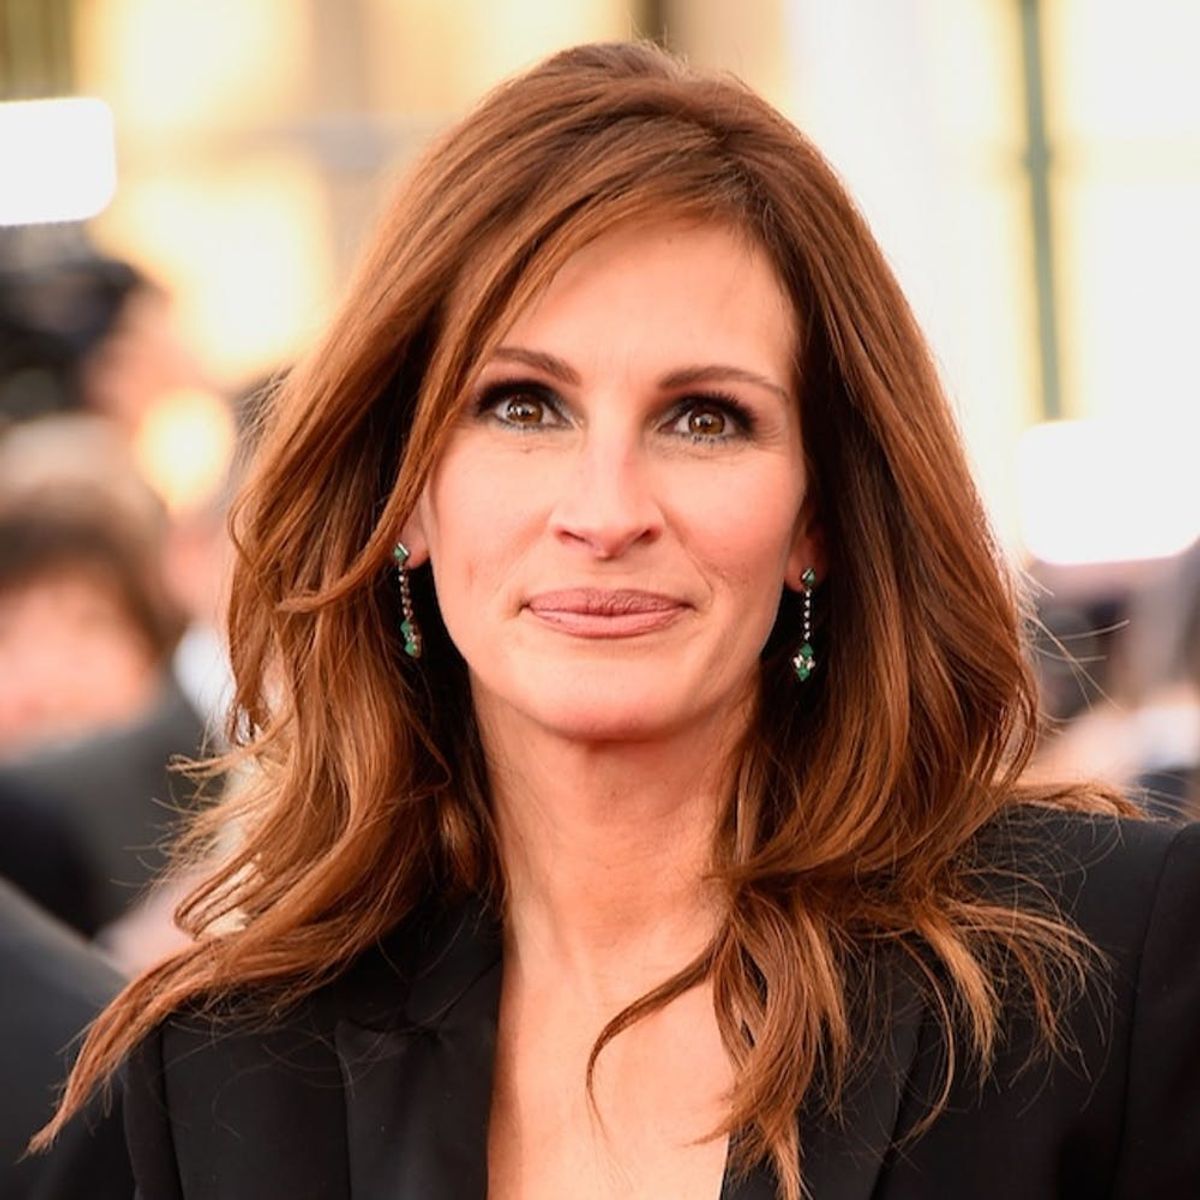 Get the Look of Julia Roberts’ Easy, Breezy NYC Apartment